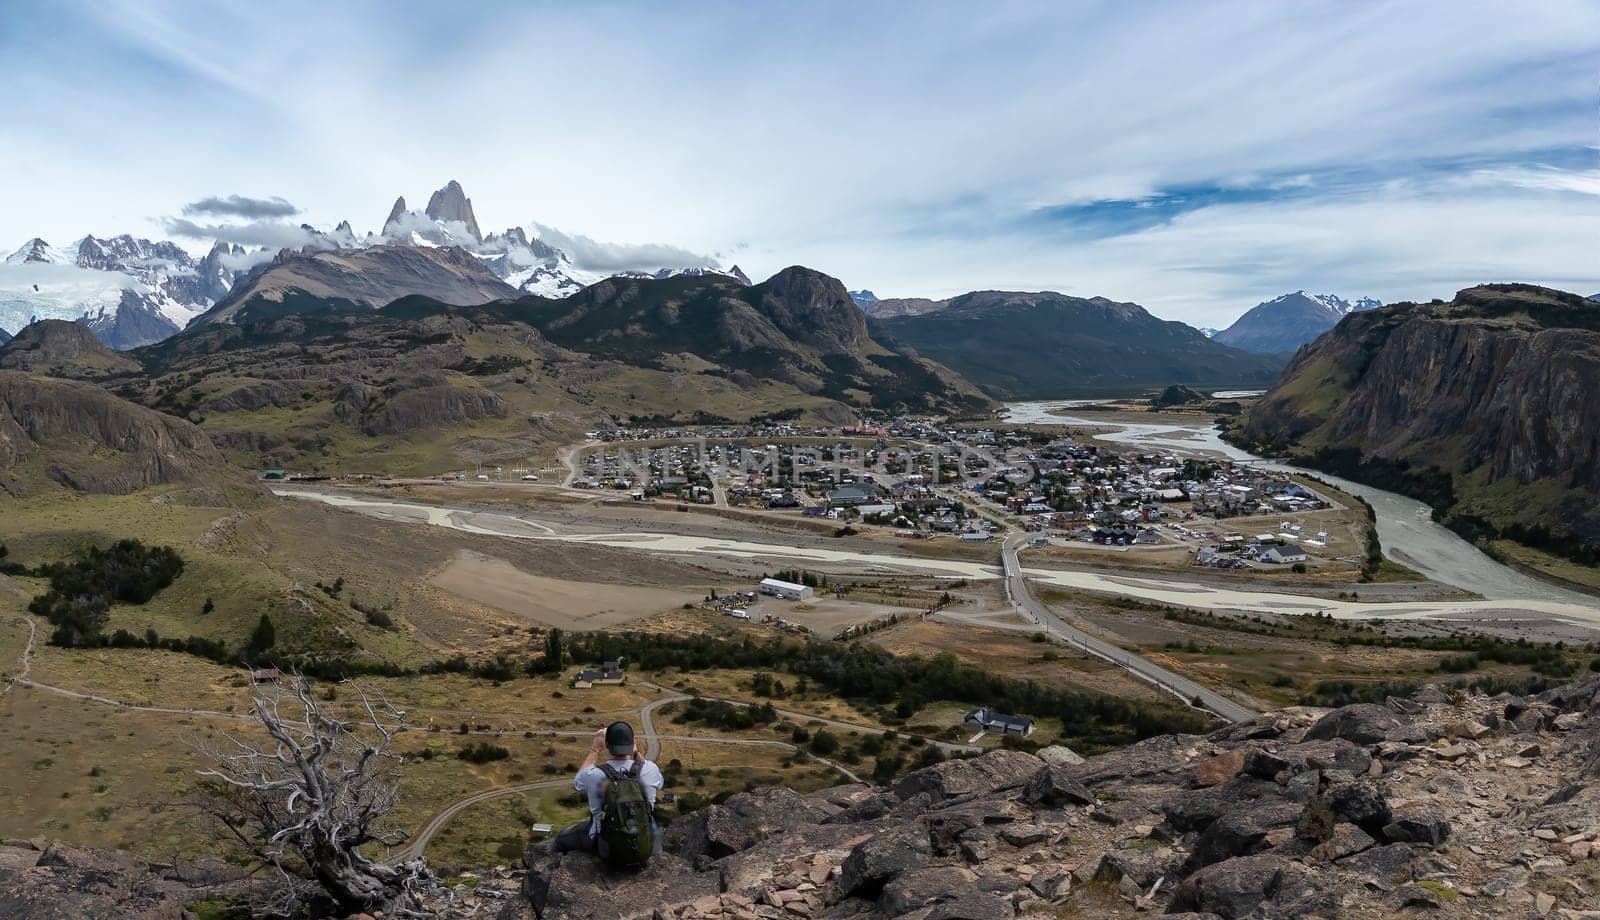 Hiker Overlooking a Scenic Mountain Town in Patagonia by FerradalFCG